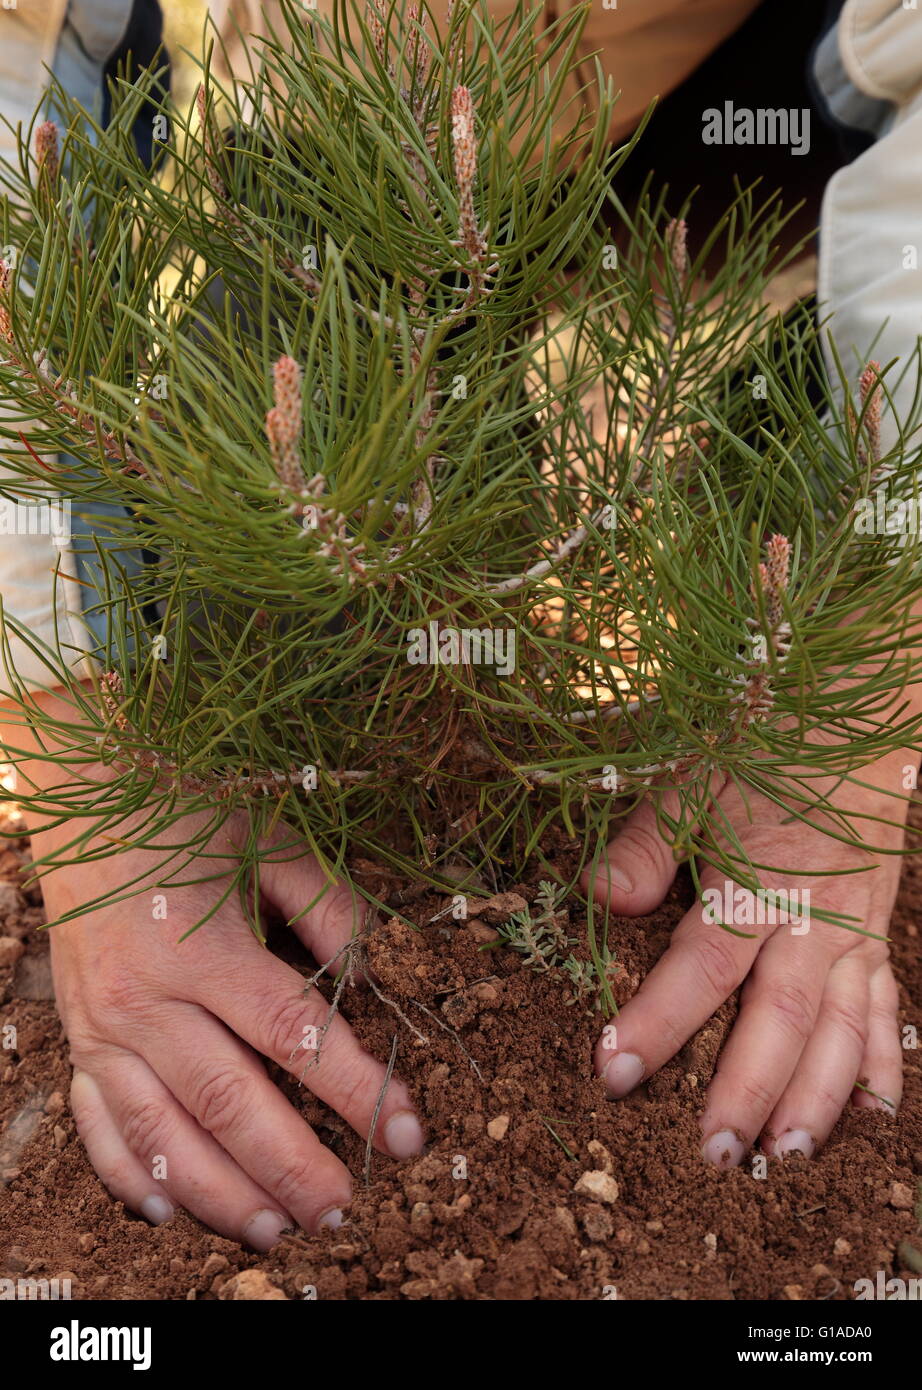 Hands of a woman planting a tree in spring. Stock Photo